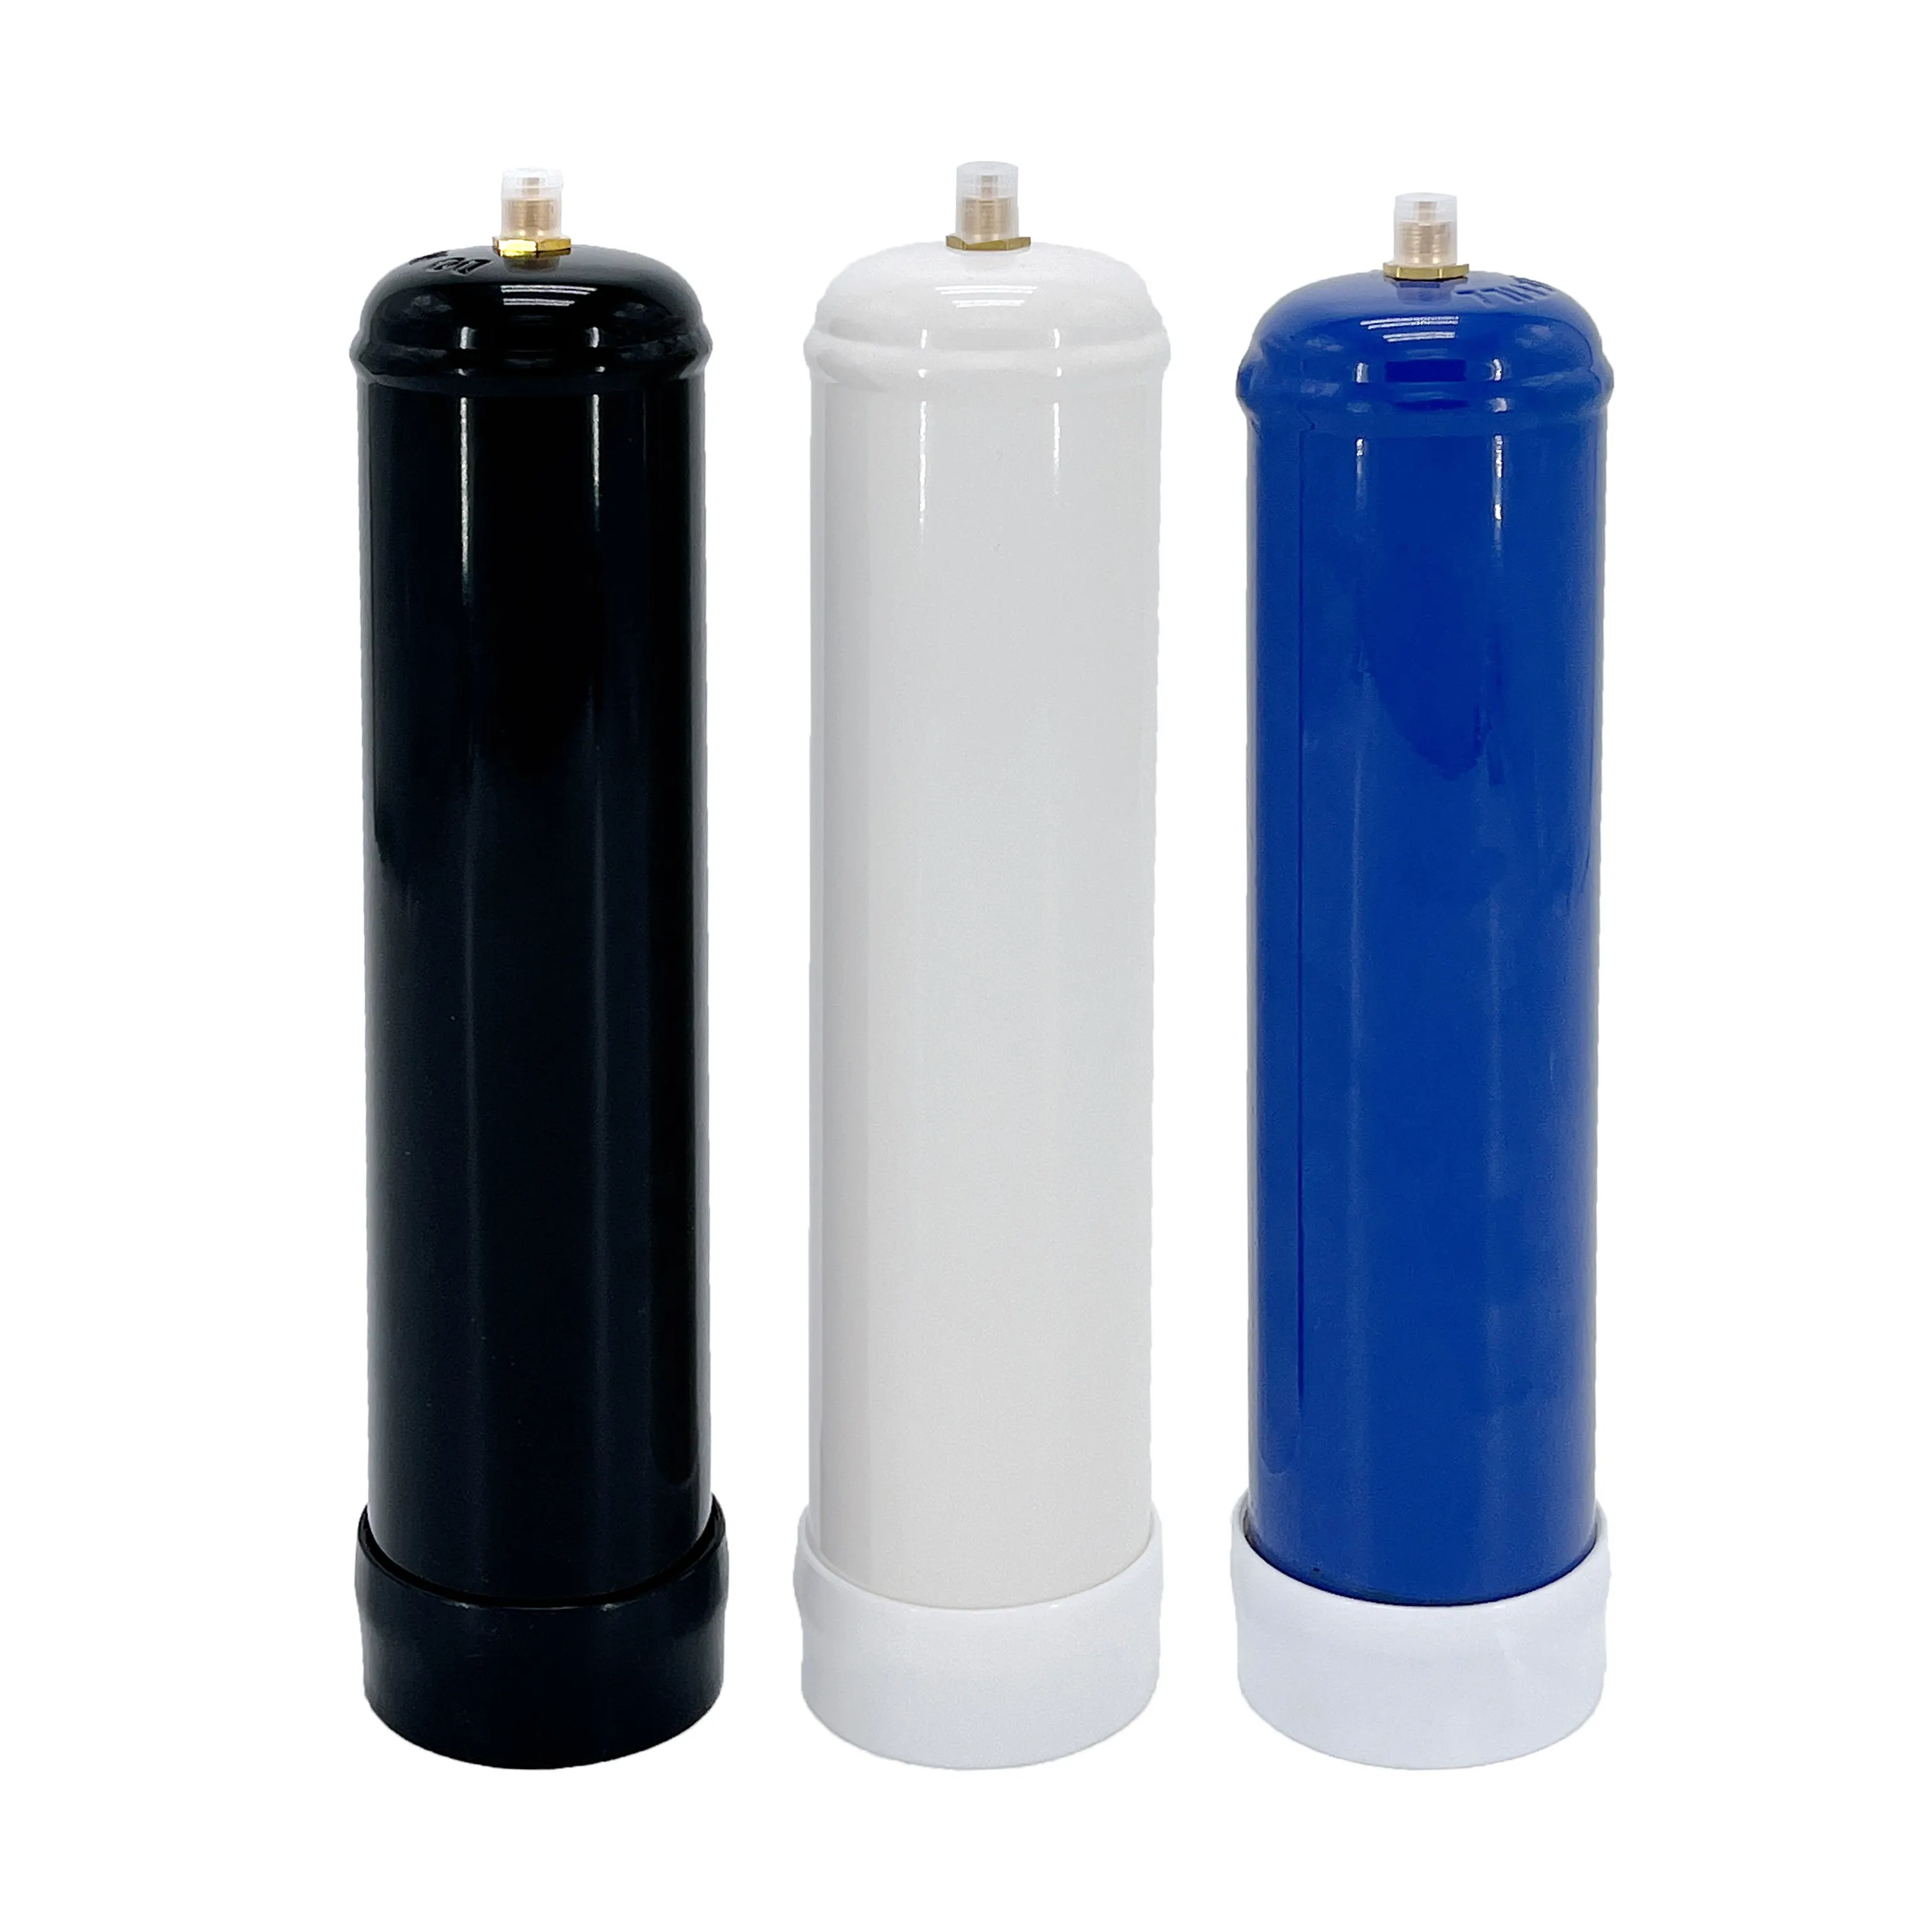 Empty cylinders Best-Selling Whipped Cream Chargers Air Bottle 580g 615g 640g 0.95L 1L 1.05L Gas Cylinder